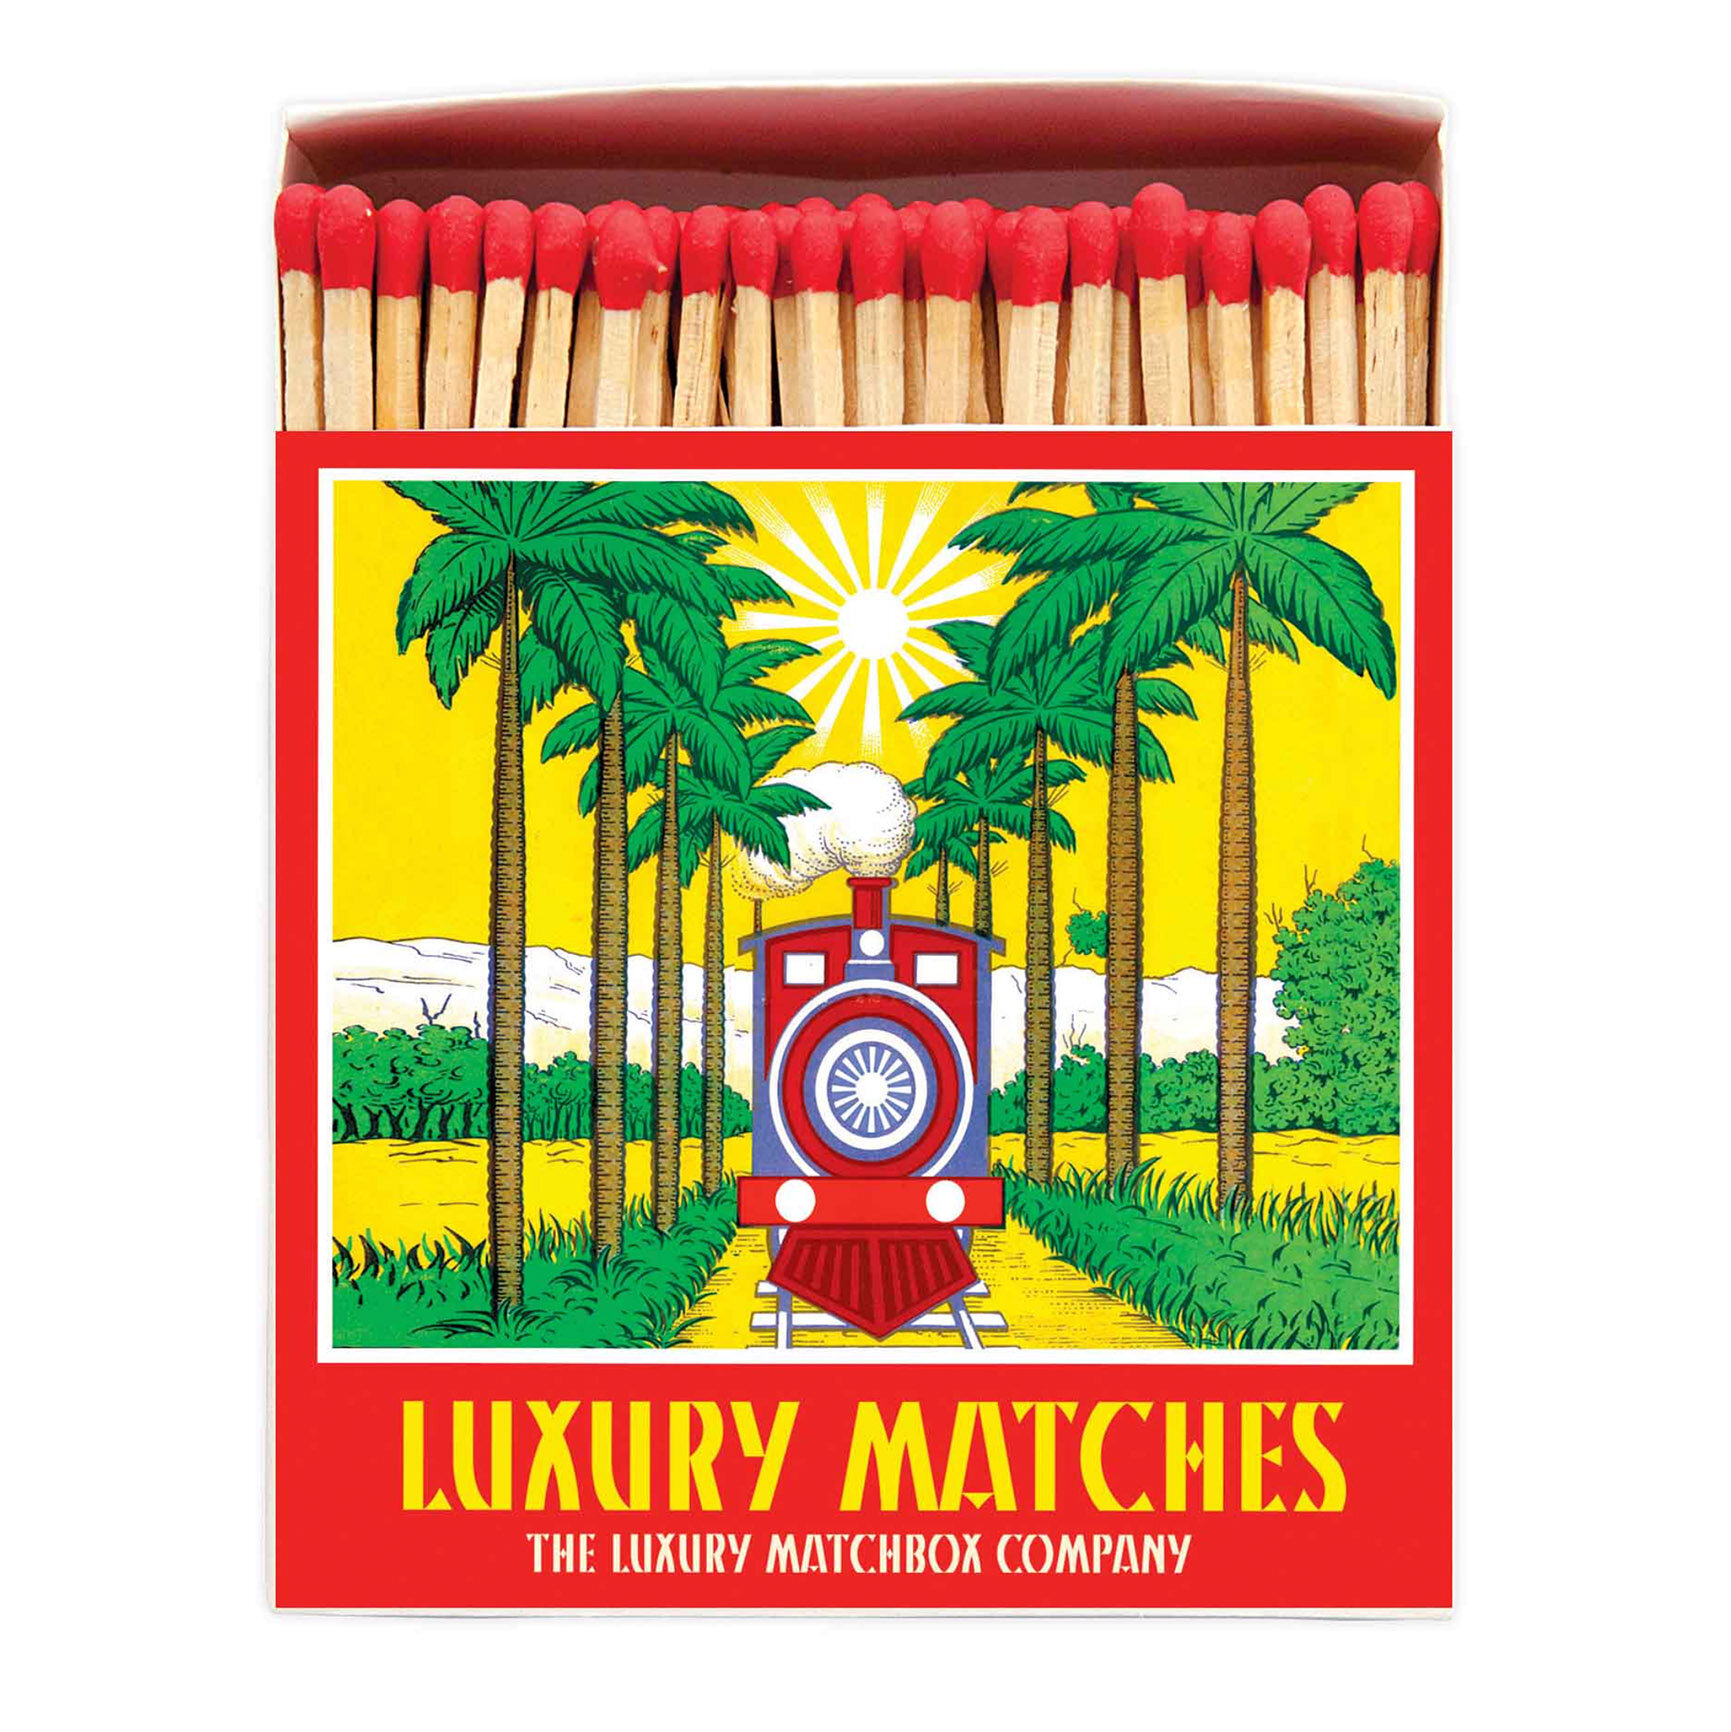 Luxurious matches in square matchbox - online shop Bebe Concept